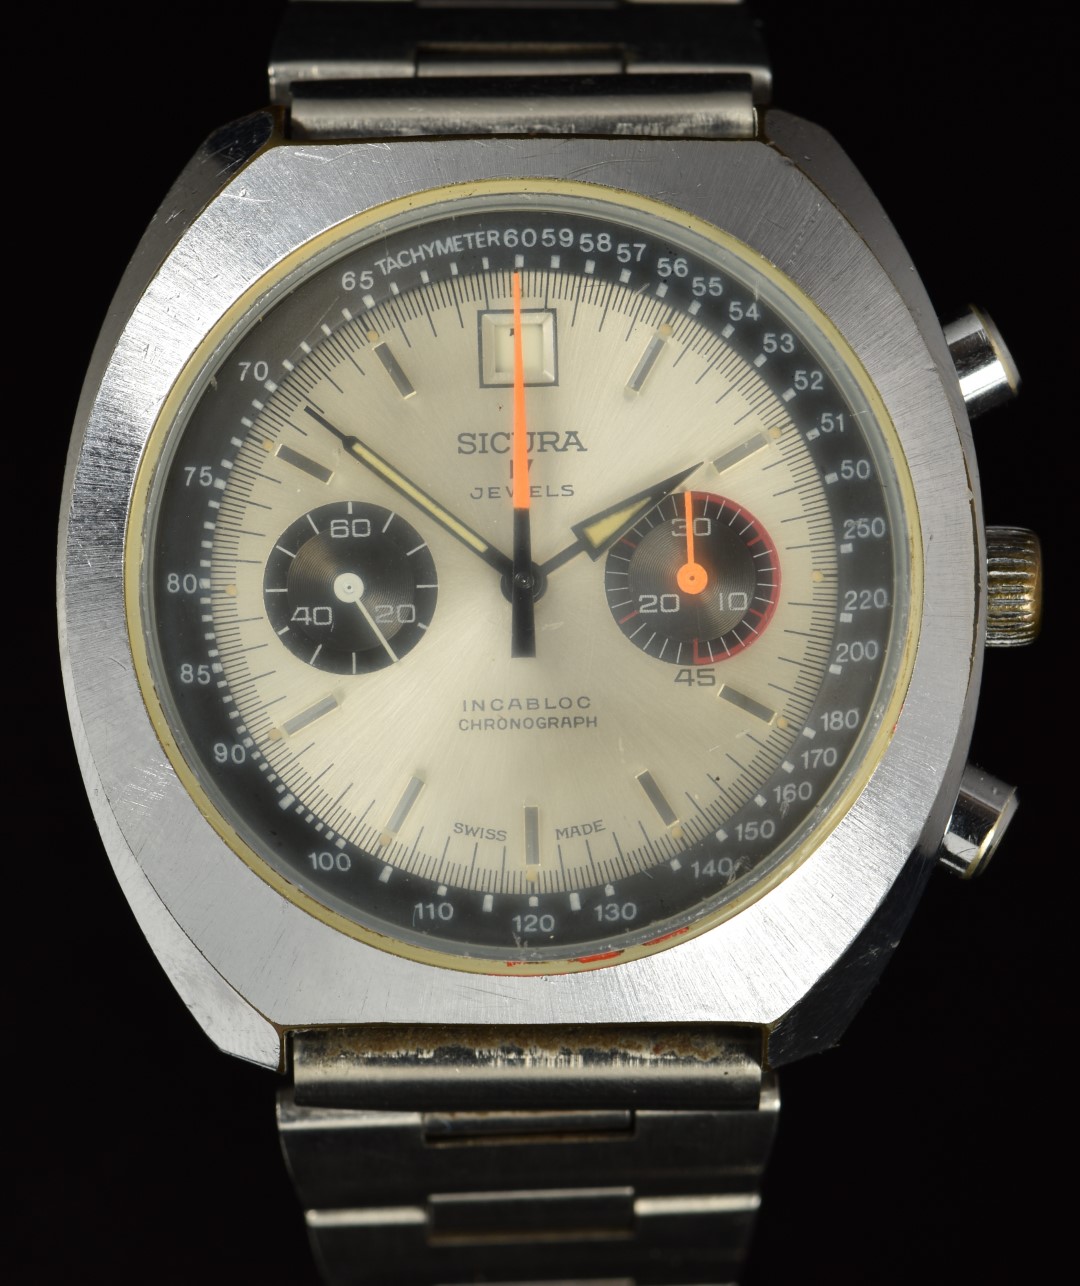 Sicura (Breitling) gentleman's chronograph wristwatch with date aperture, luminous hour and